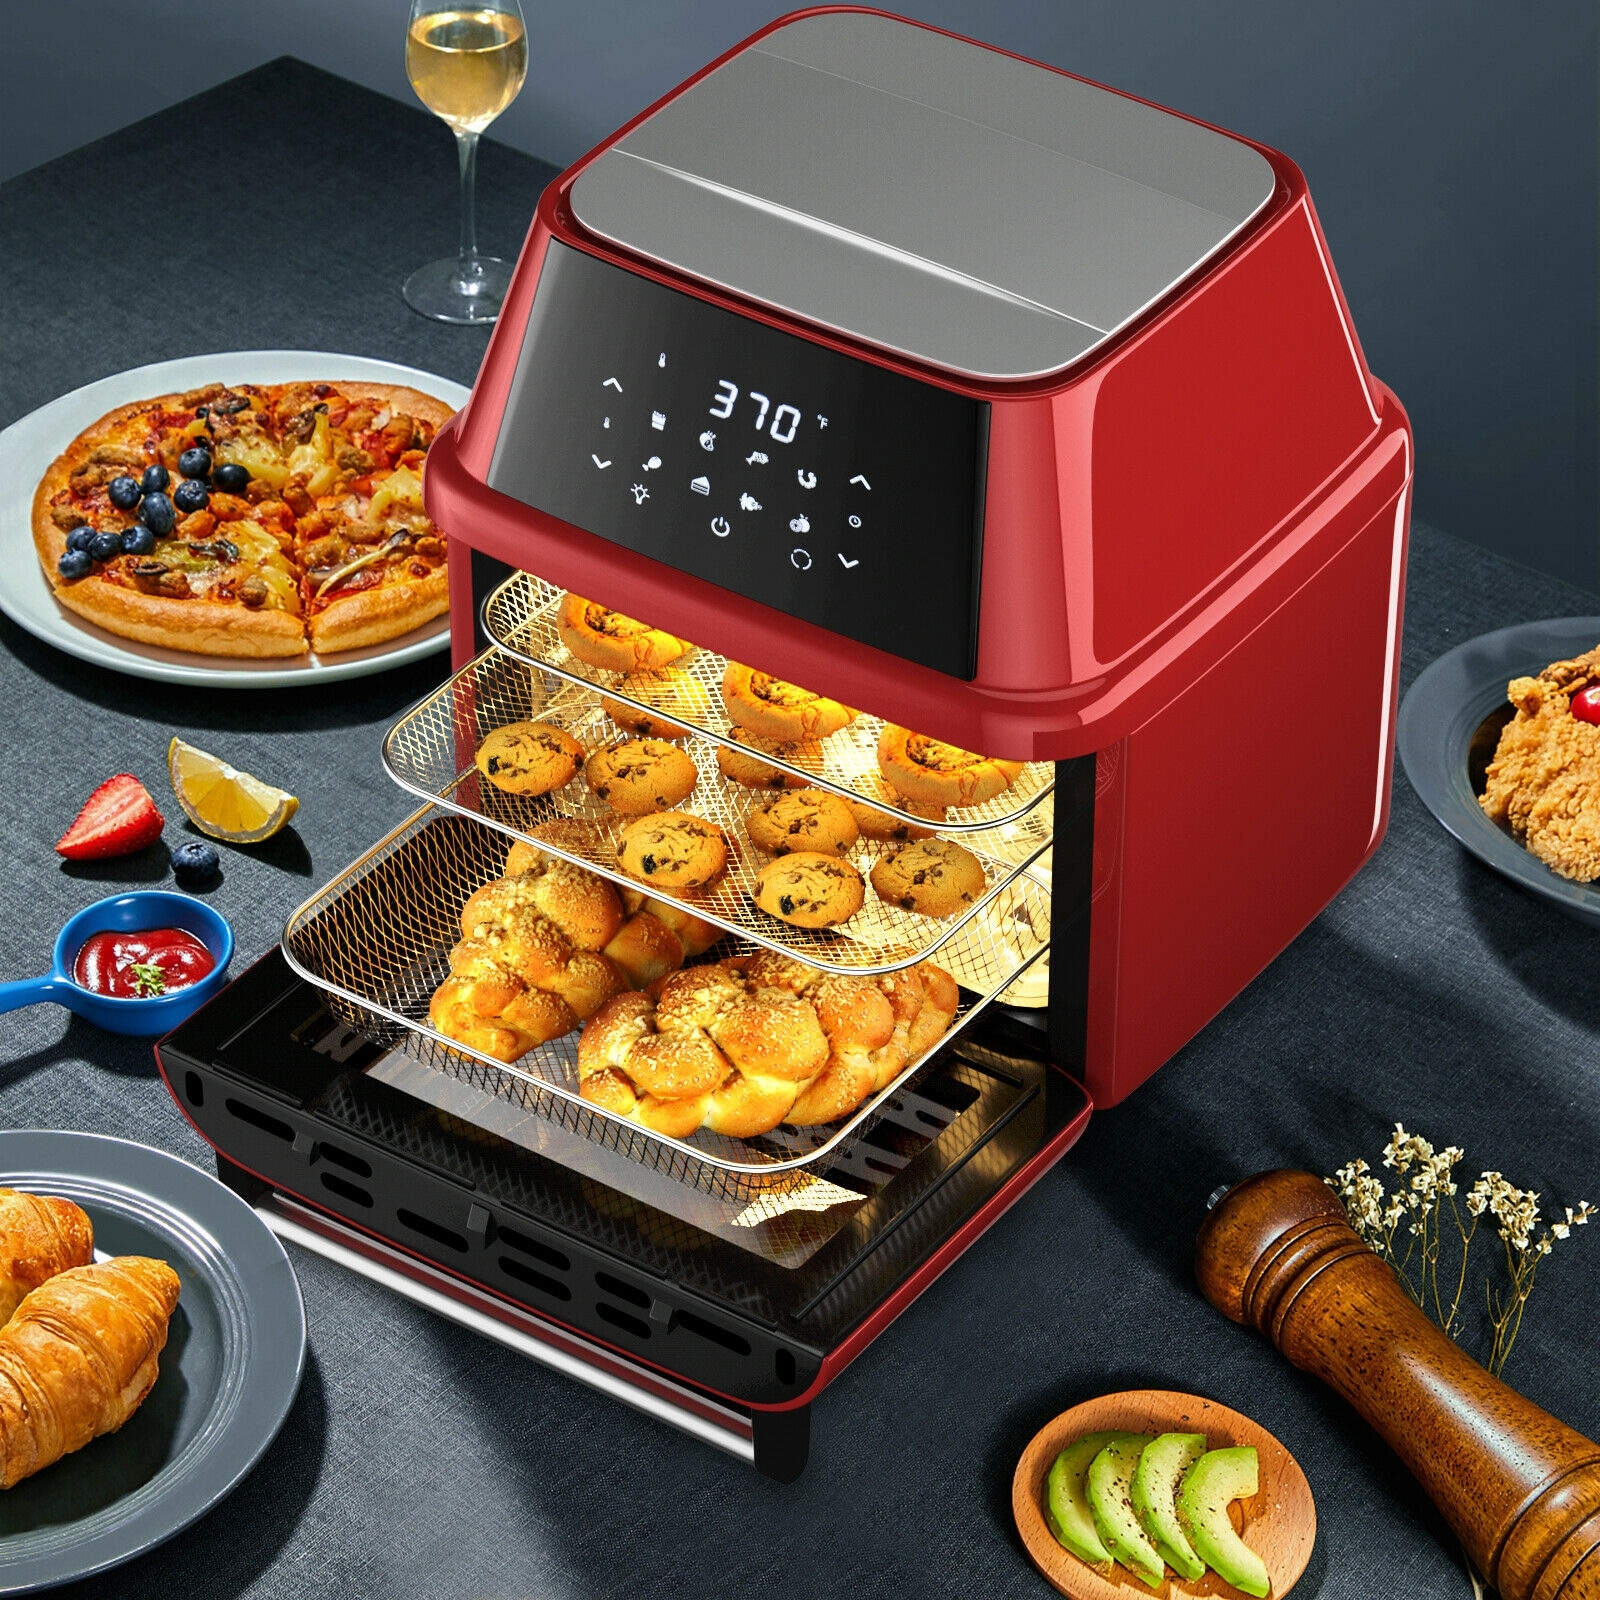 Pringle Air Oven25 With Aero Crisp Technology 5 In One Traditional Air  Fryer Oven, – Dehydrator, Air Fryer, Convection Oven With Rotisserie